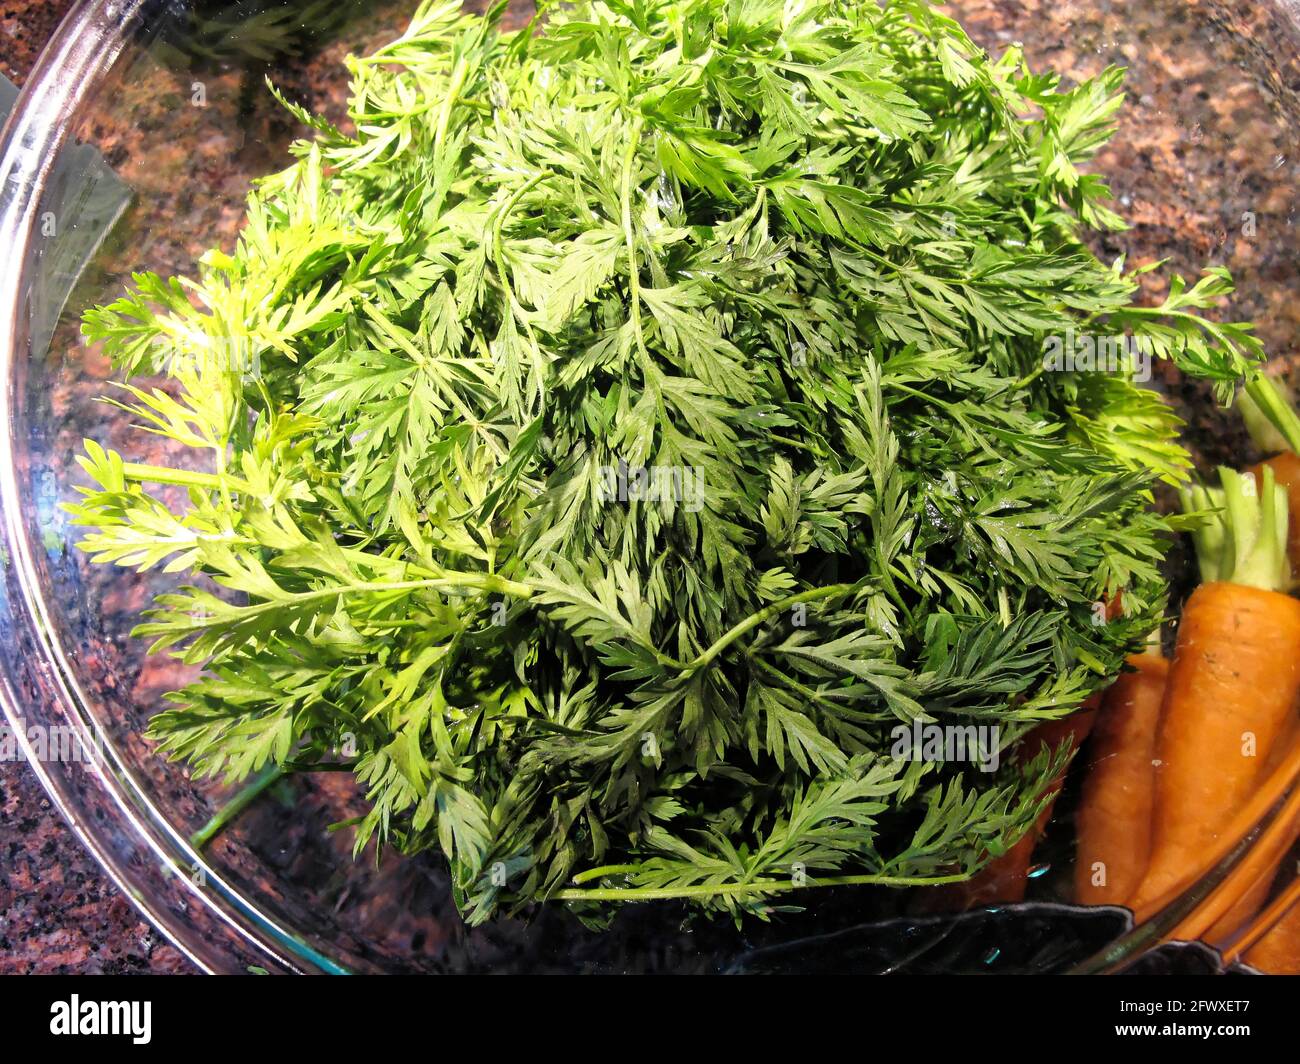 Freshly washed carrot greens in a glass bowl. Stock Photo